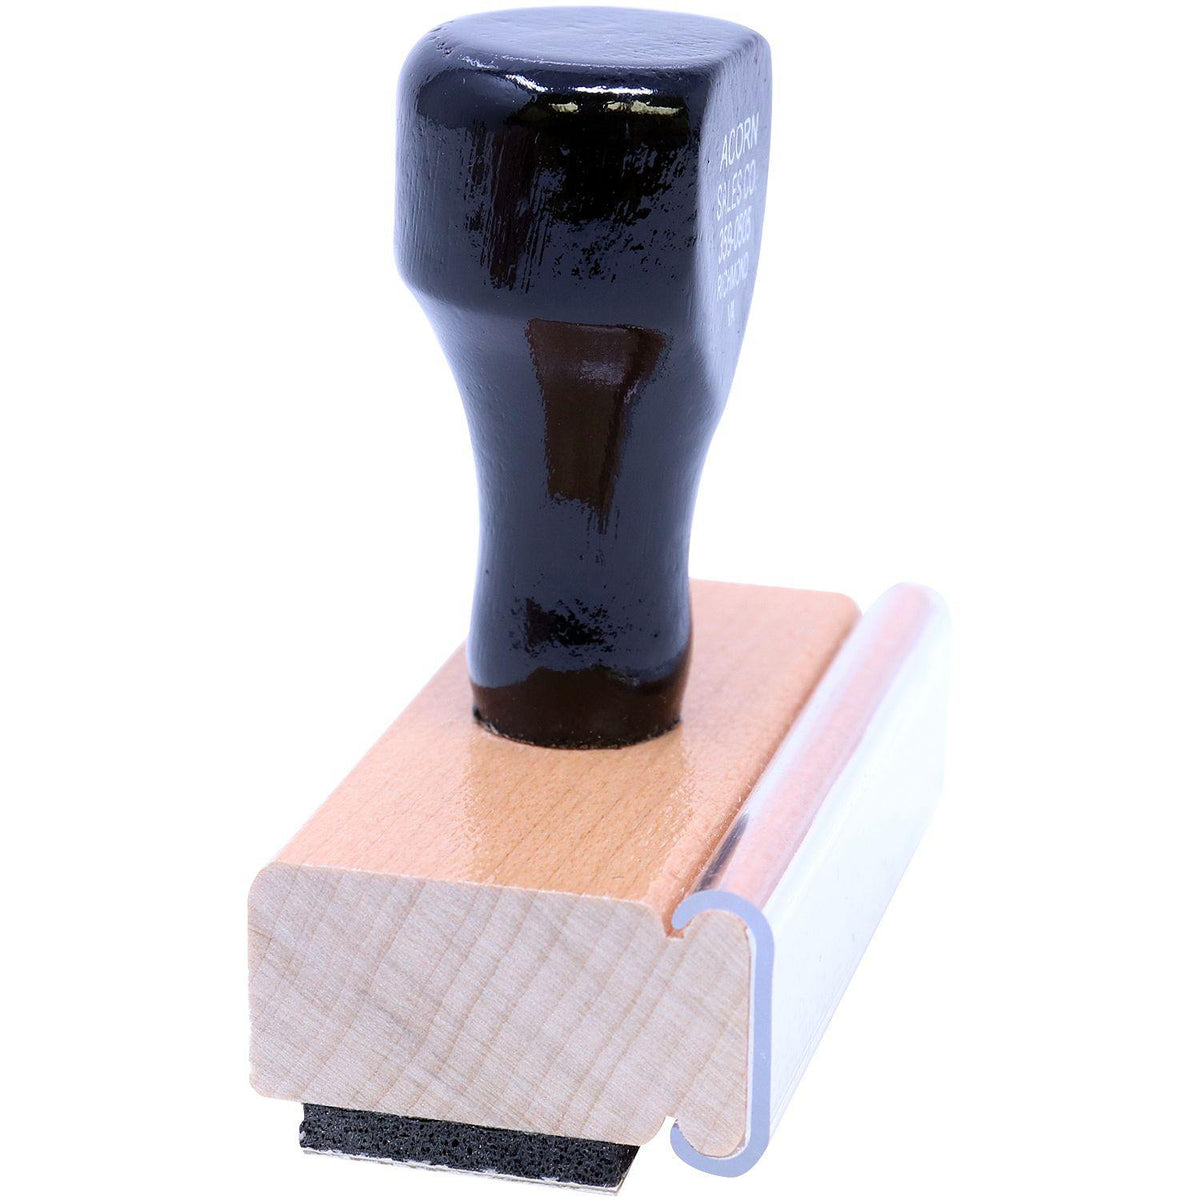 Side View of Bold File Rubber Stamp at an Angle